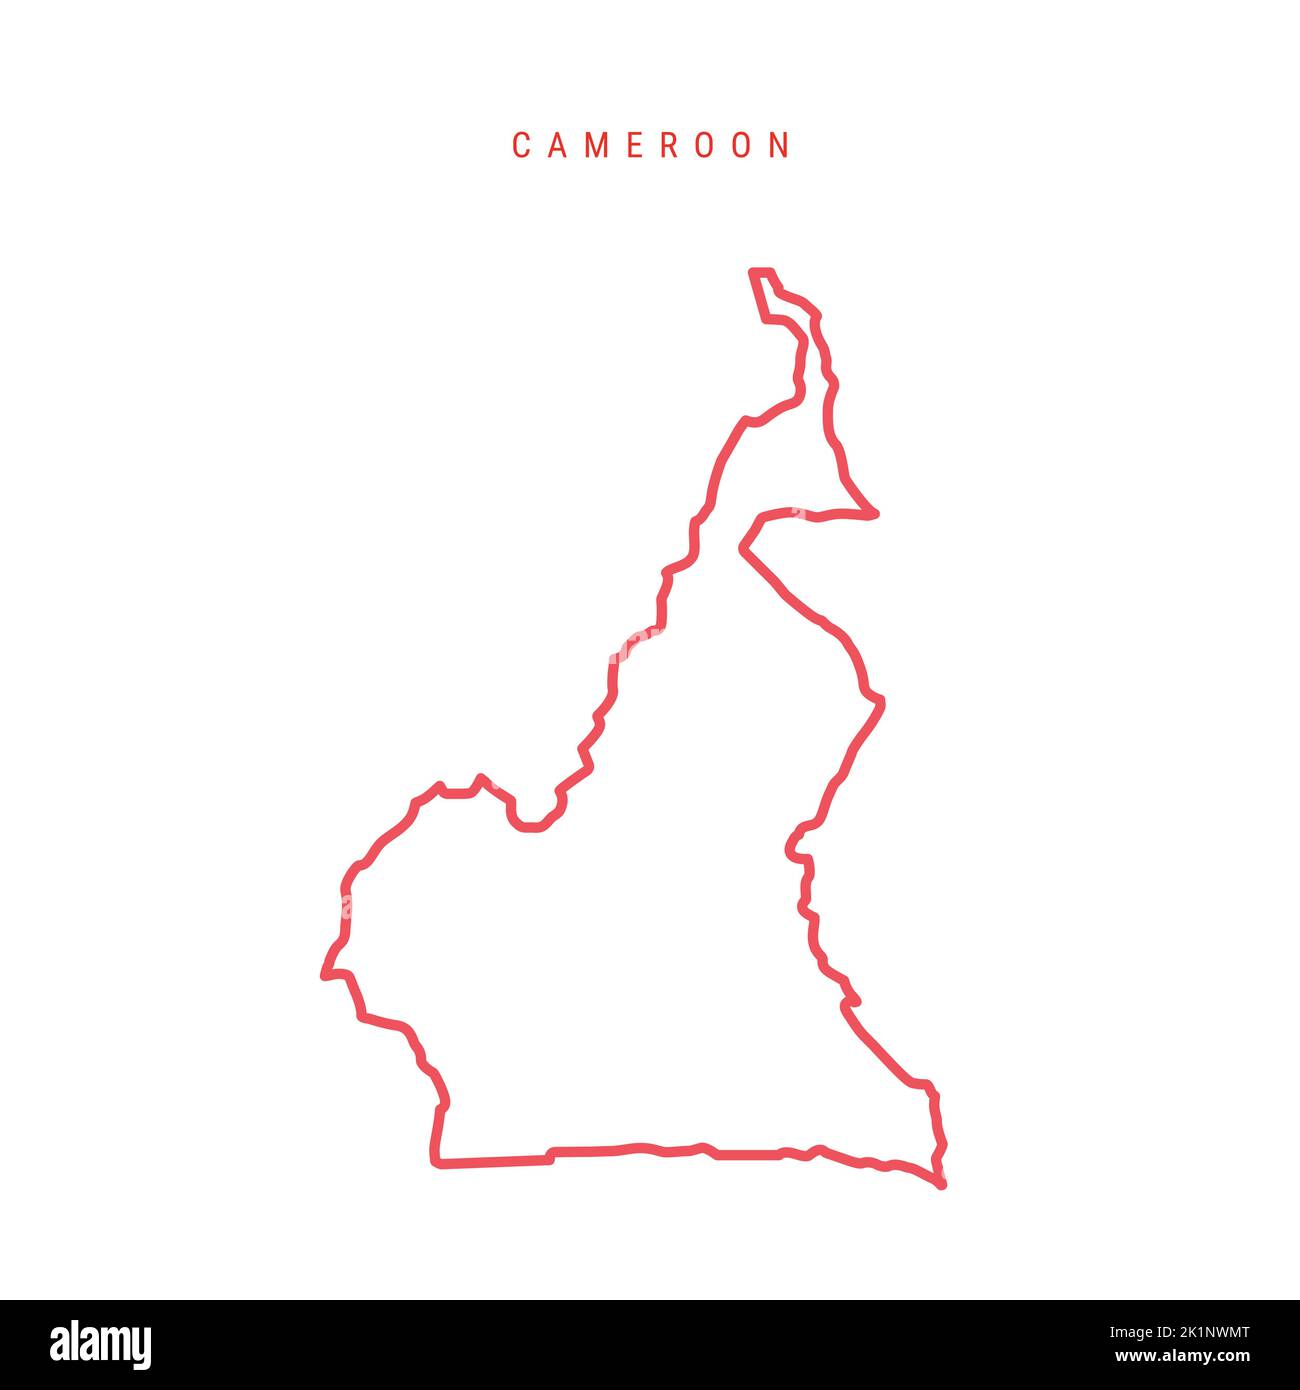 Cameroon editable outline map. Cameroonian red border. Country name. Adjust line weight. Change to any color. Vector illustration. Stock Vector